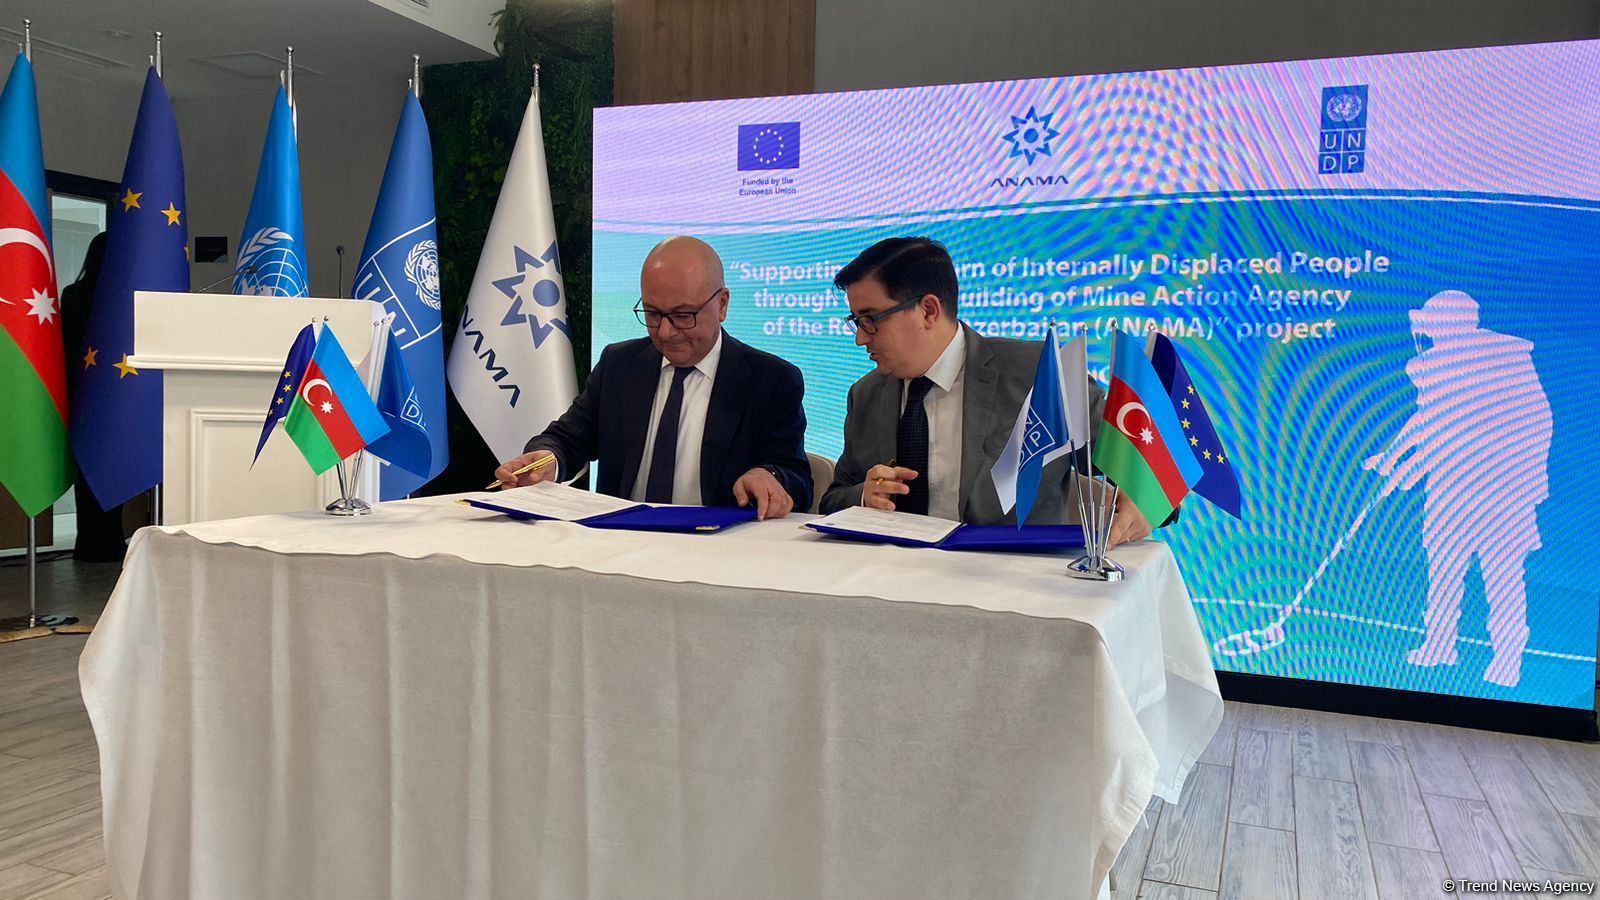 Azerbaijan joins forces with EU, UNDP to speed up de-mining of its liberated lands (PHOTO)